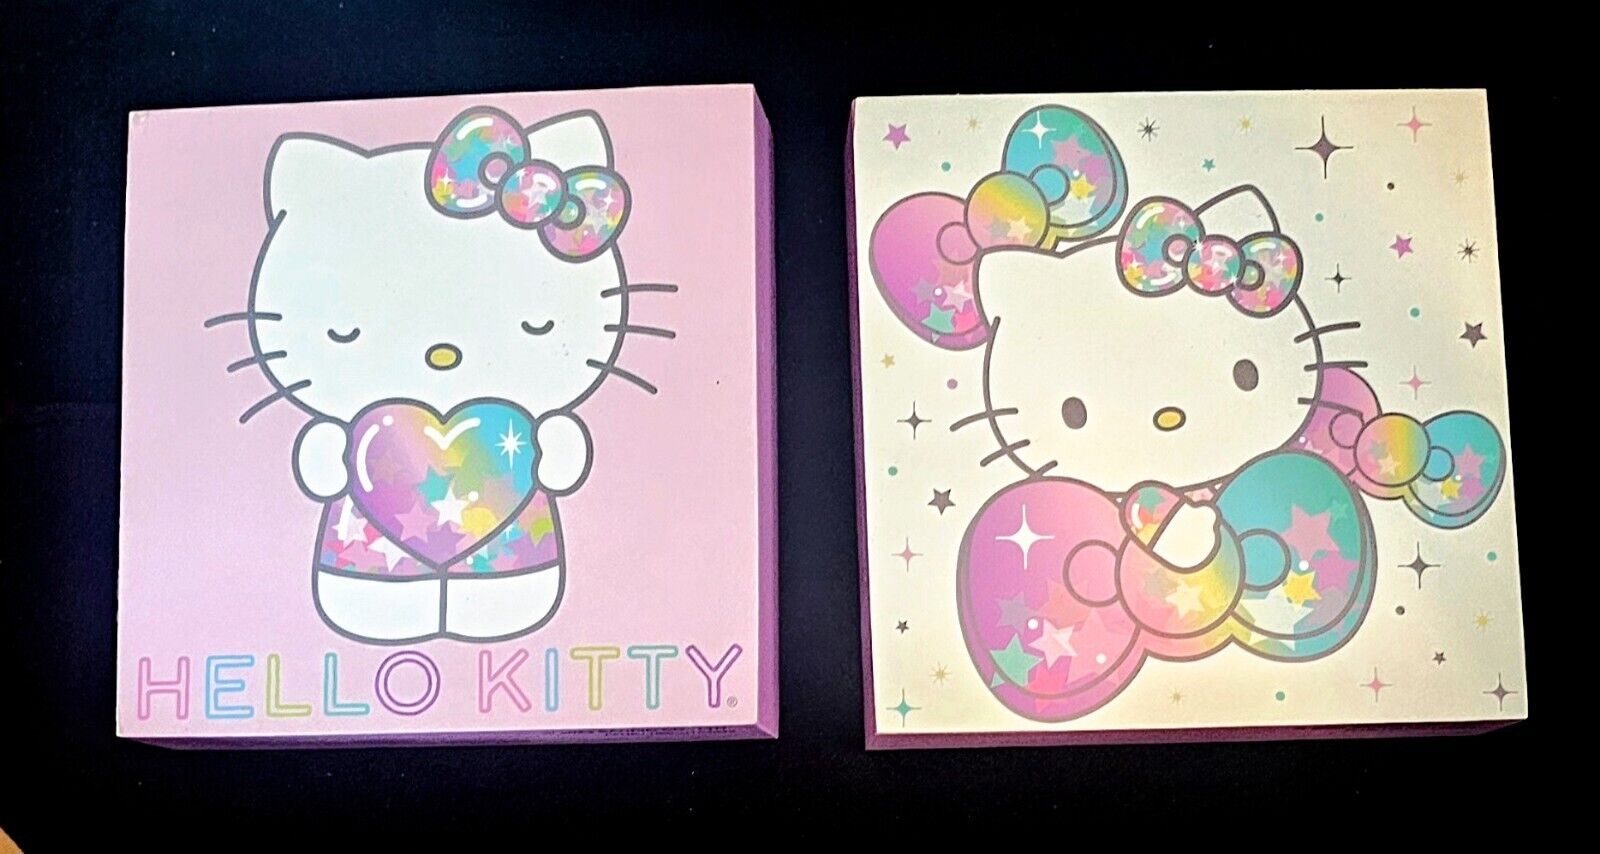 Sanrio Hello Kitty Wall Decor Plaque Signs (2) Pastels, Stars And Heart NEW